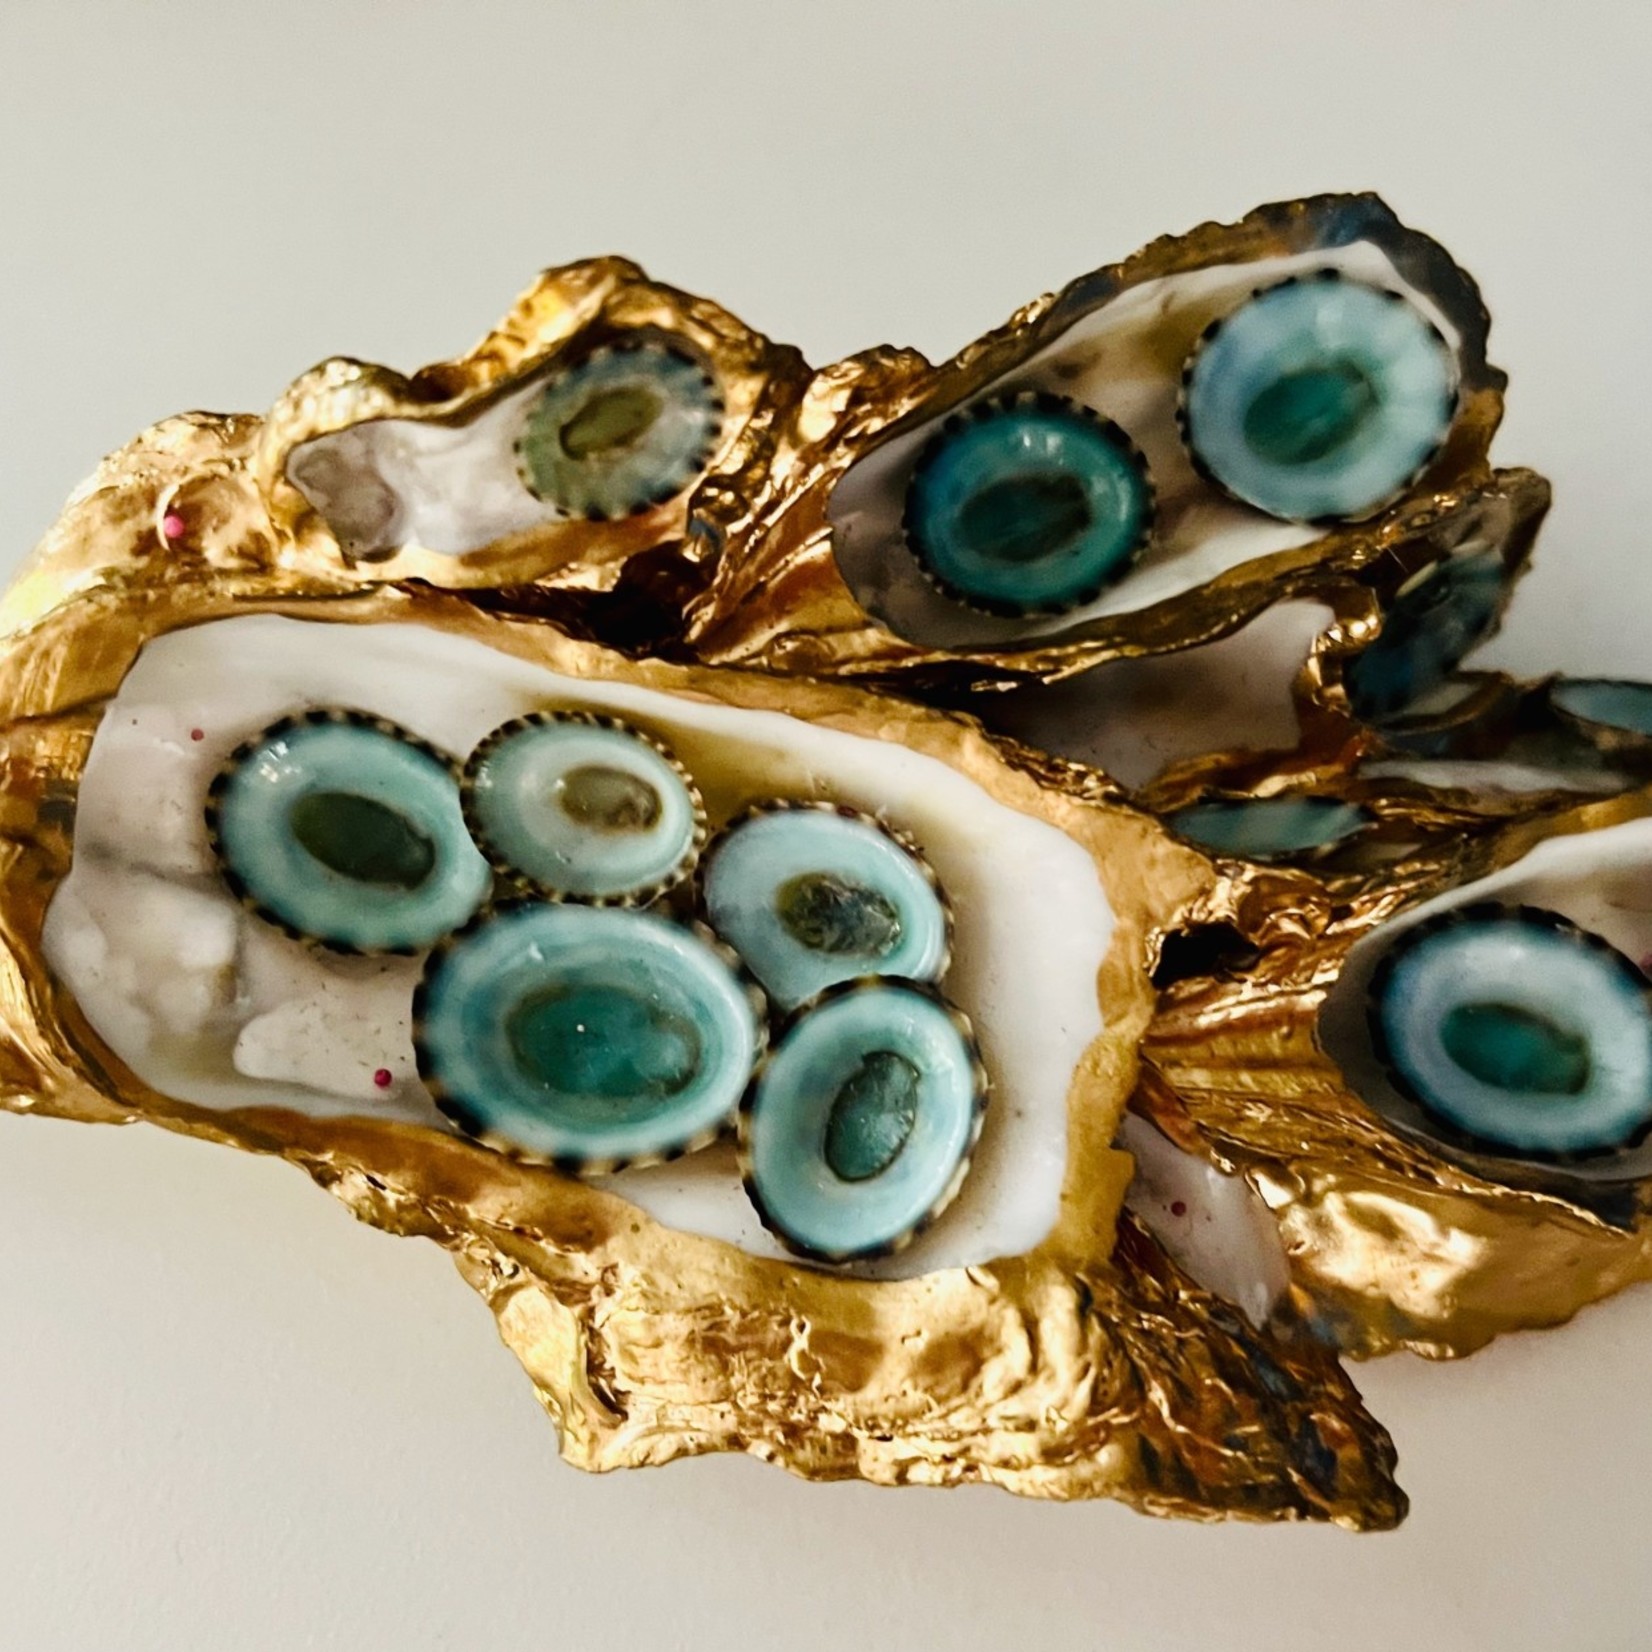 Pam Maschal Gold Leaf Oyster cluster w/turquoise Mexican limpets, PAMM